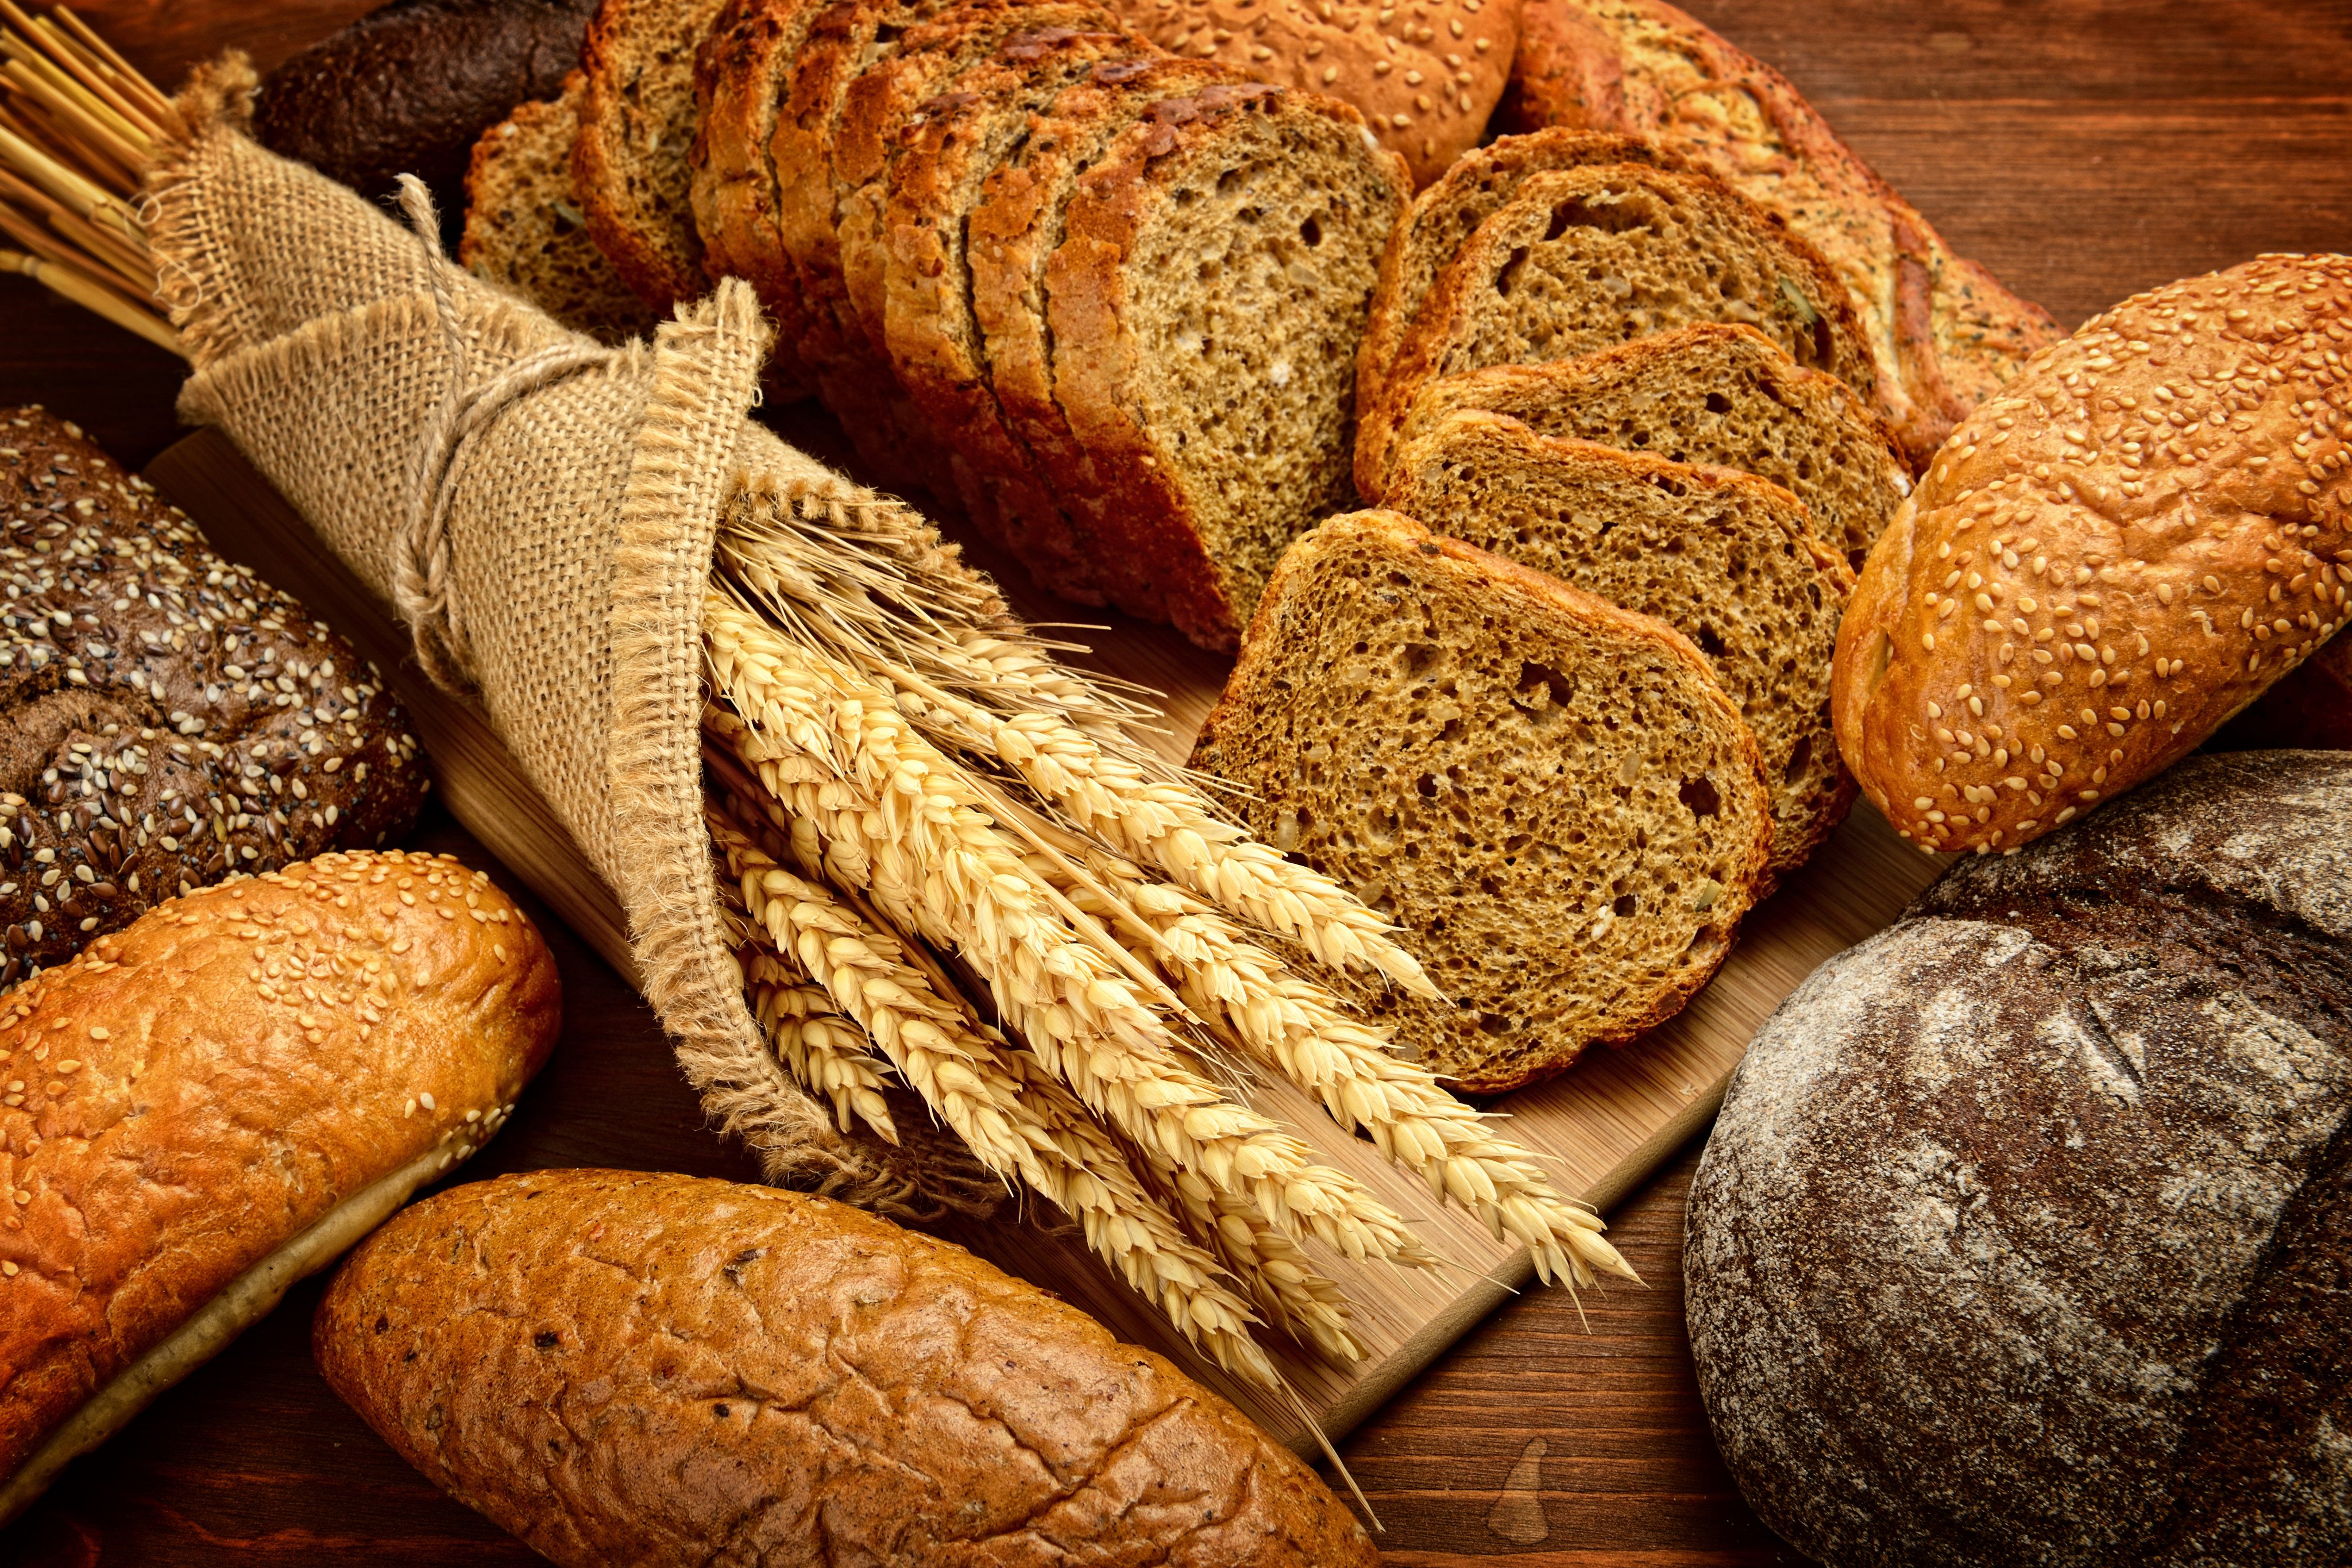 Gluten is found in many grains, including wheat, barley, rye, and triticale – a cross between wheat and rye – and sometimes oats. Photo: Shutterstock